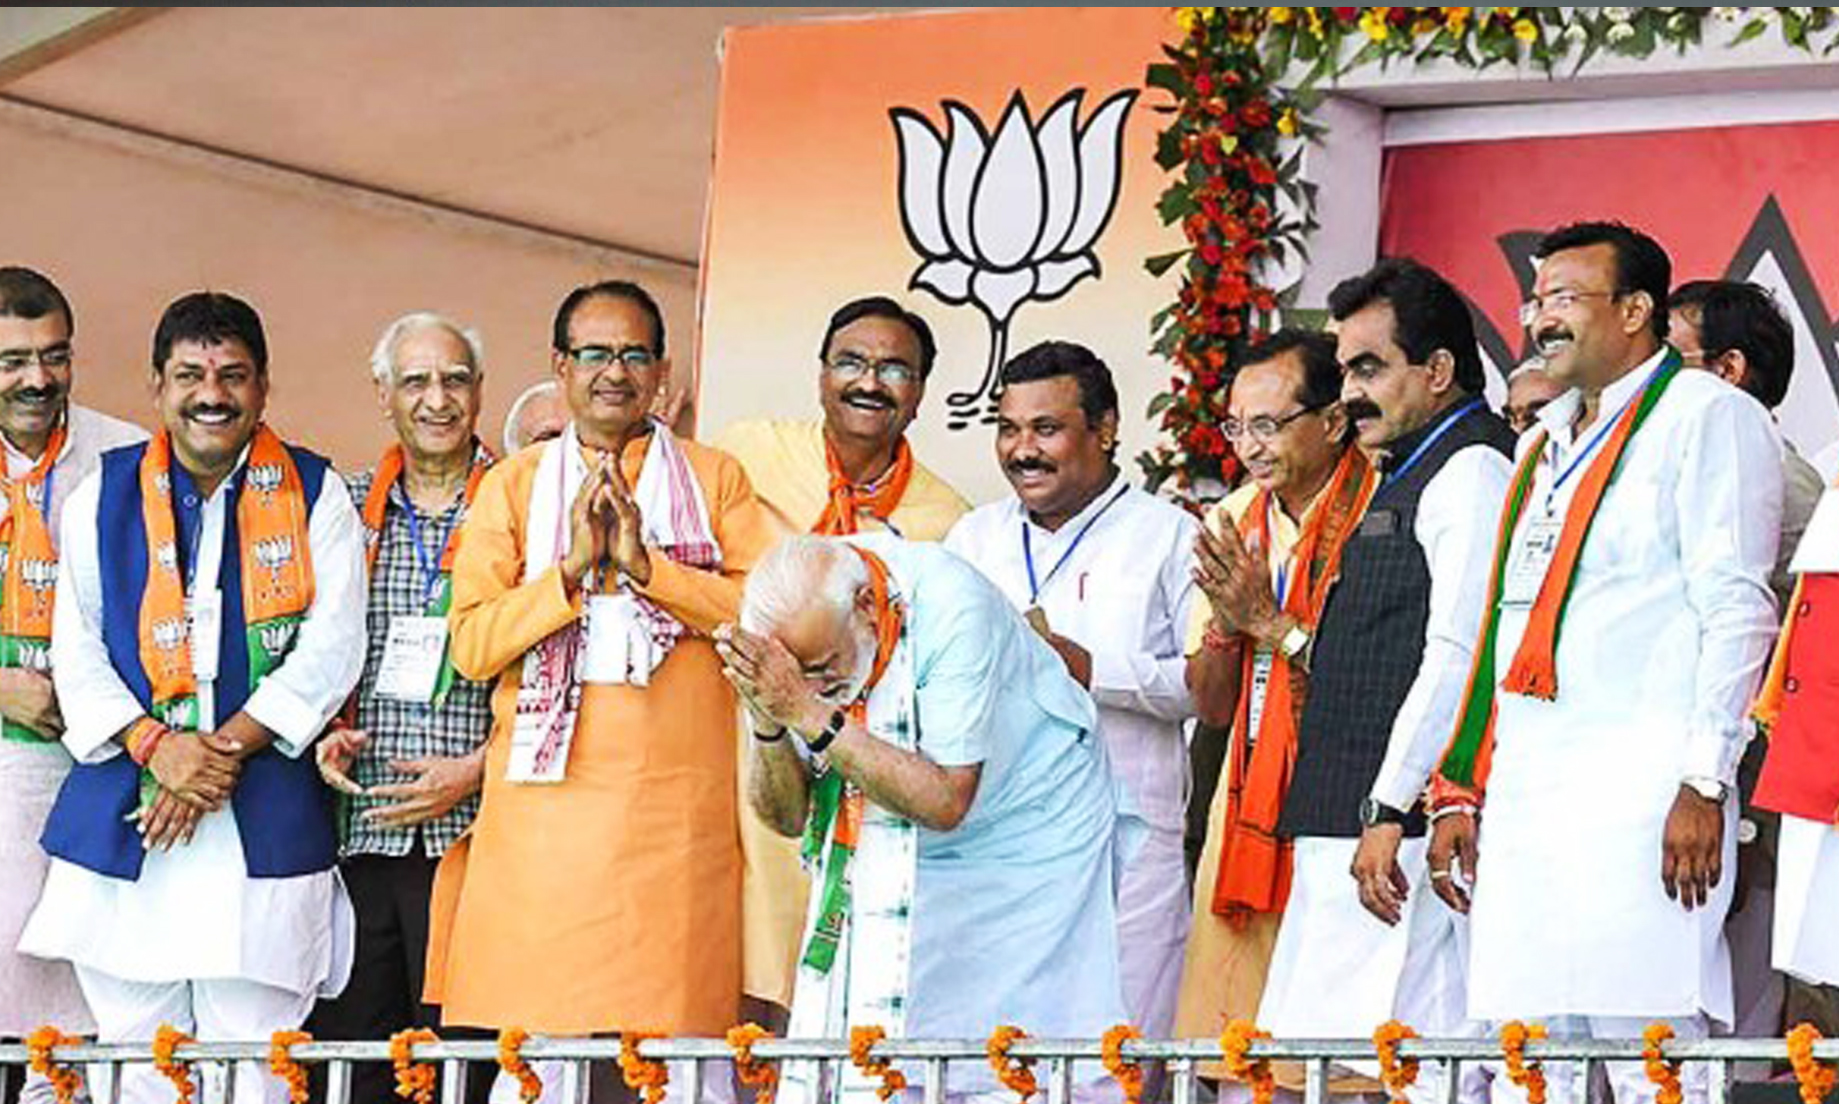 BJP surges ahead 269 of 495 seats in early trends, Cong trails far behind with 51